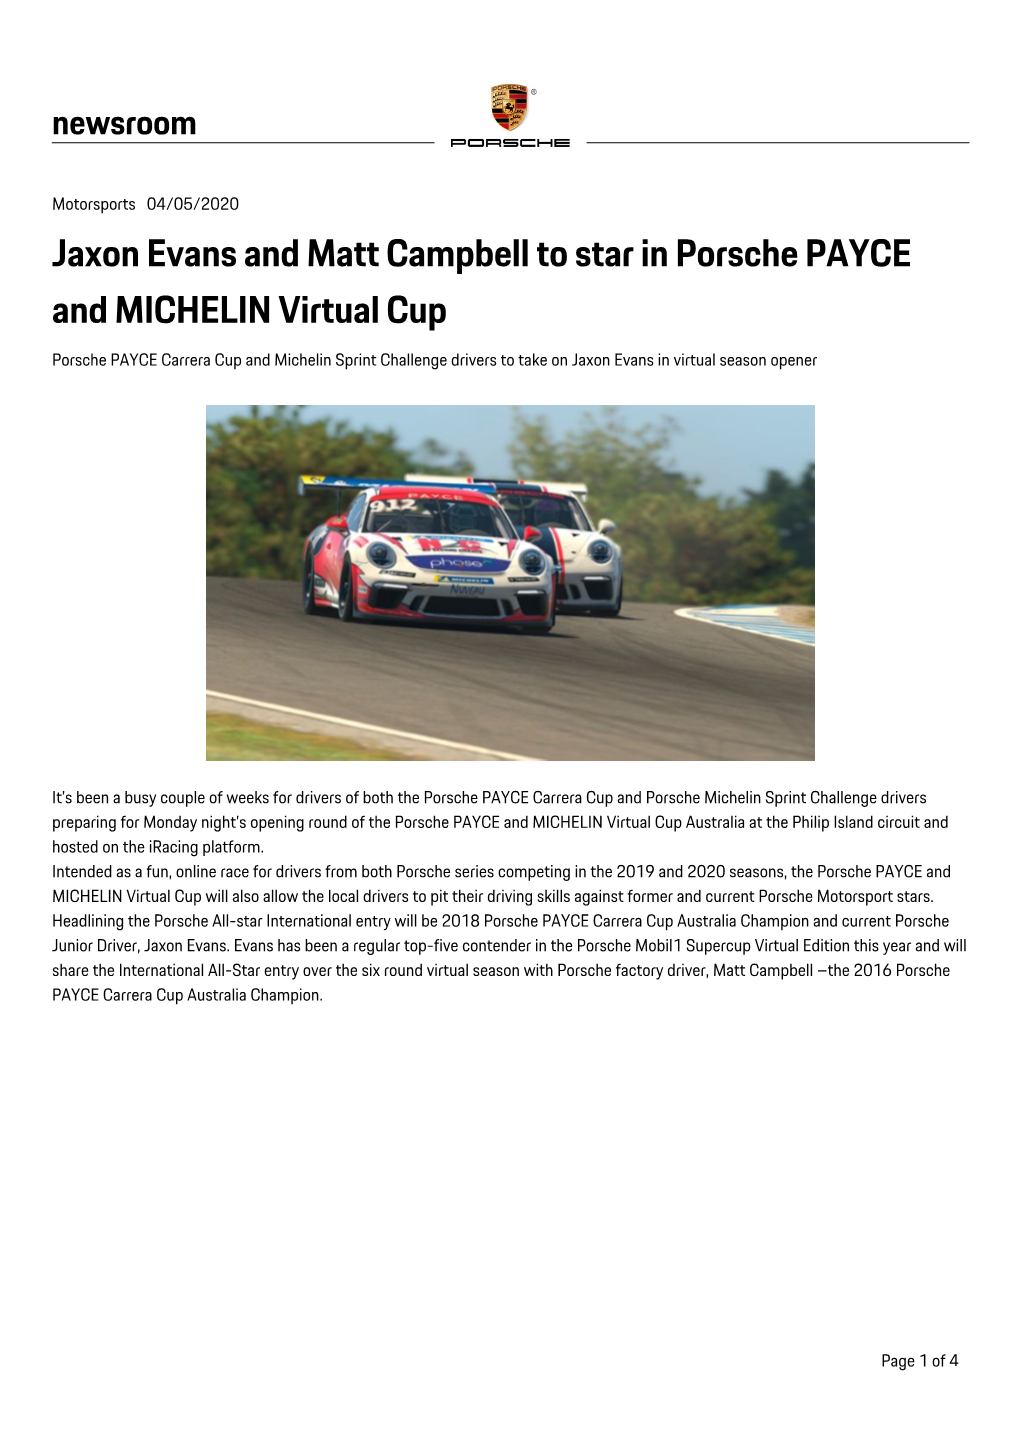 Jaxon Evans and Matt Campbell to Star in Porsche PAYCE and MICHELIN Virtual